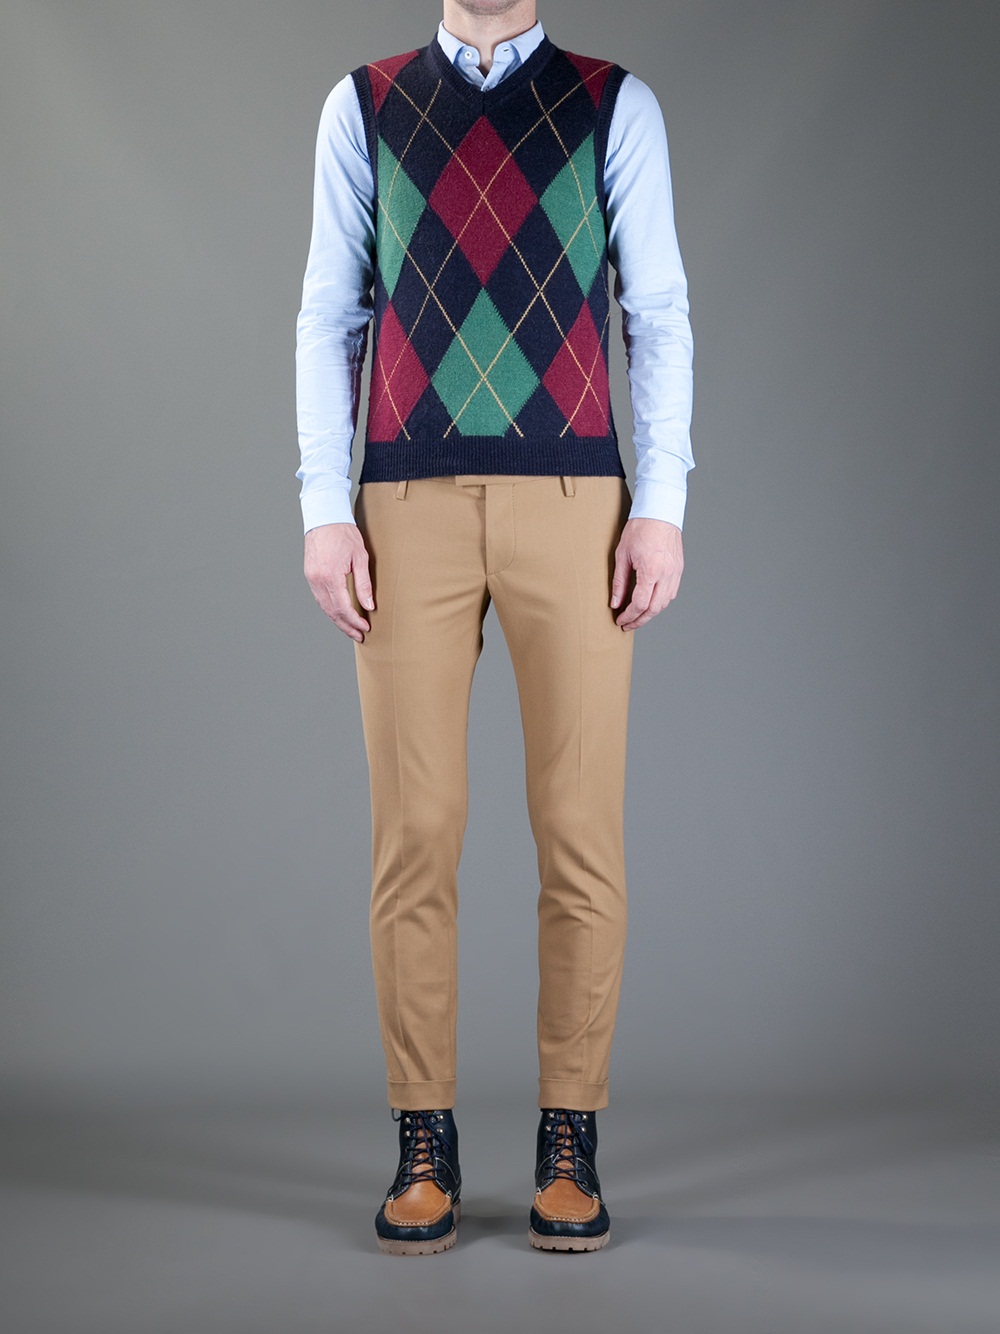 DSquared² Argyle Sweater Vest in Red for Men - Lyst